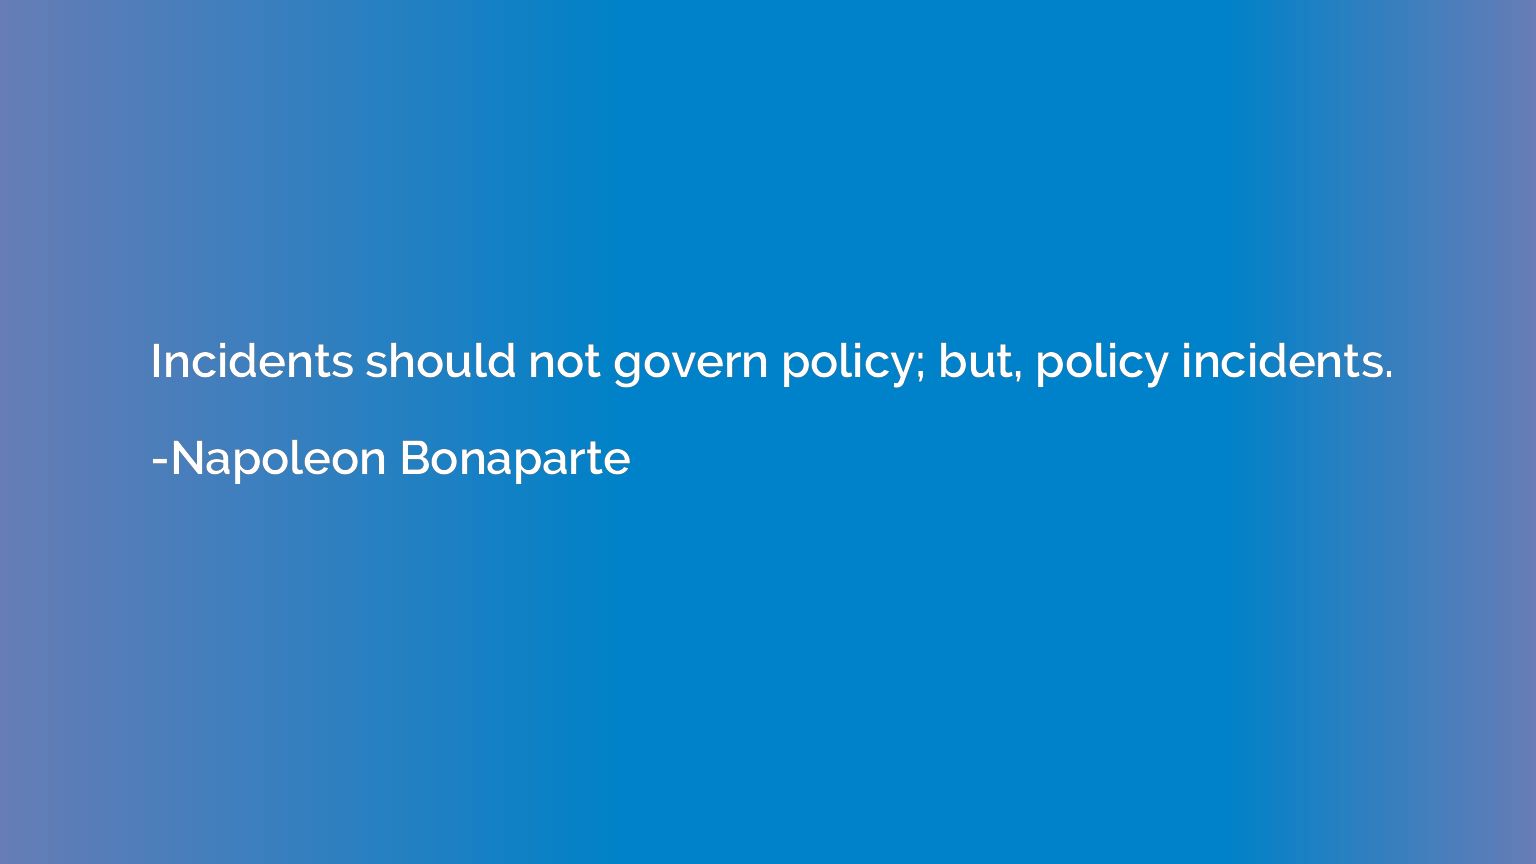 Incidents should not govern policy; but, policy incidents.